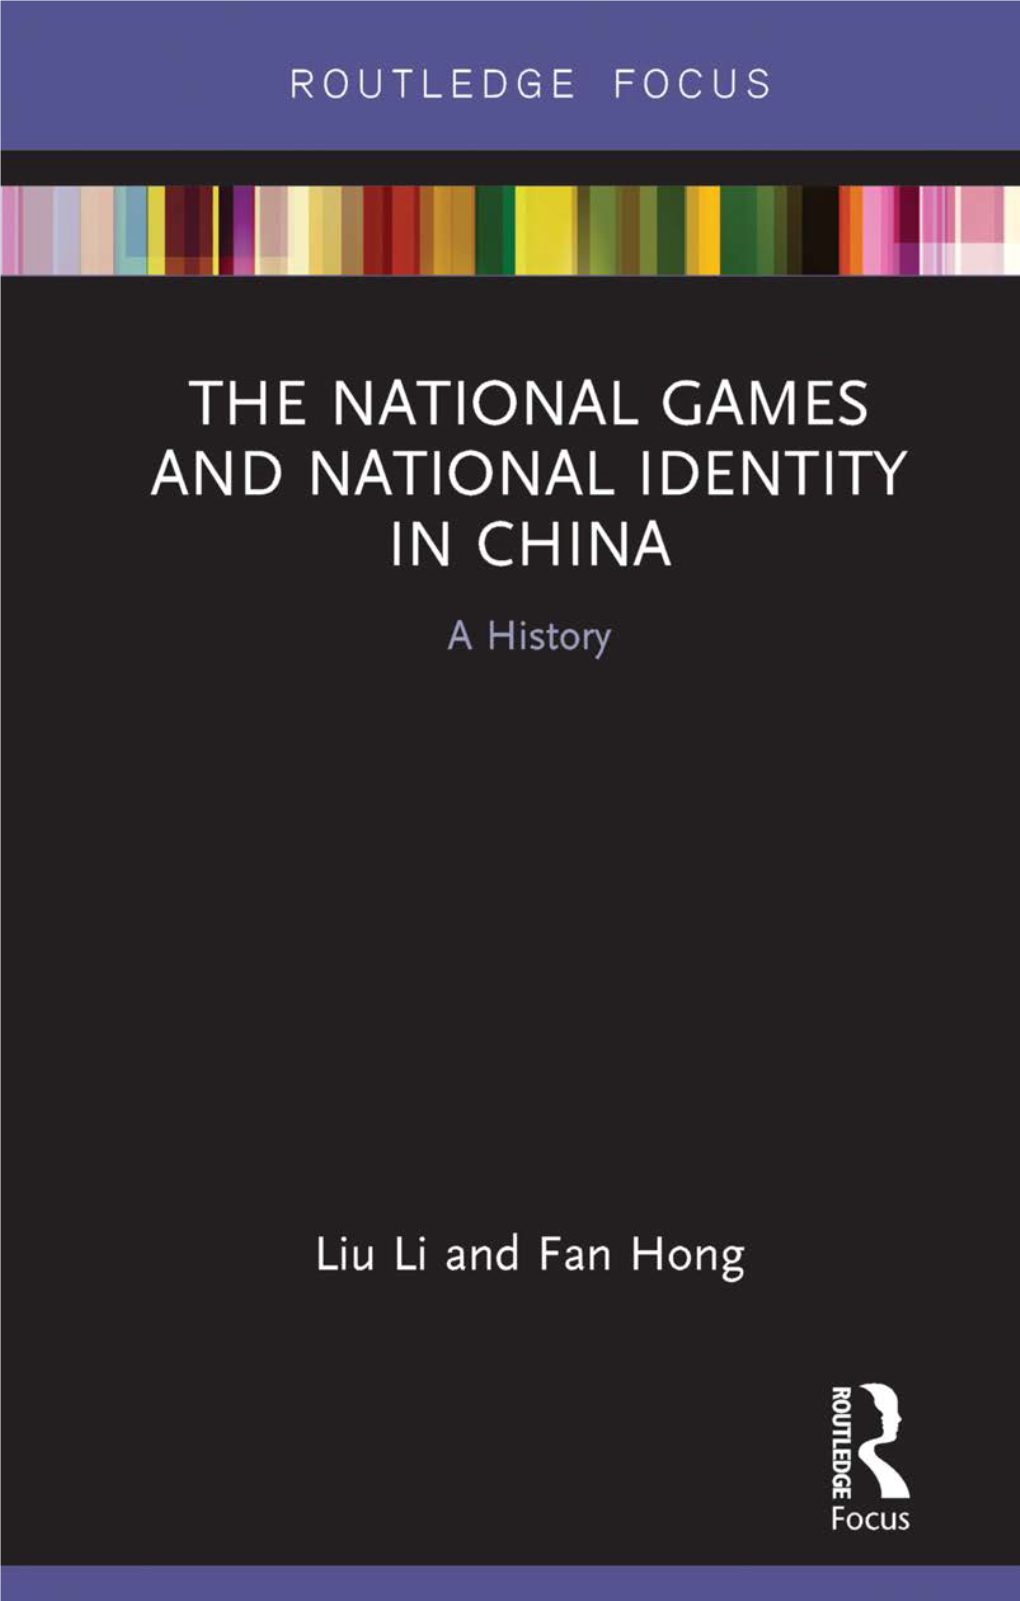 The National Games and National Identity in China: a History